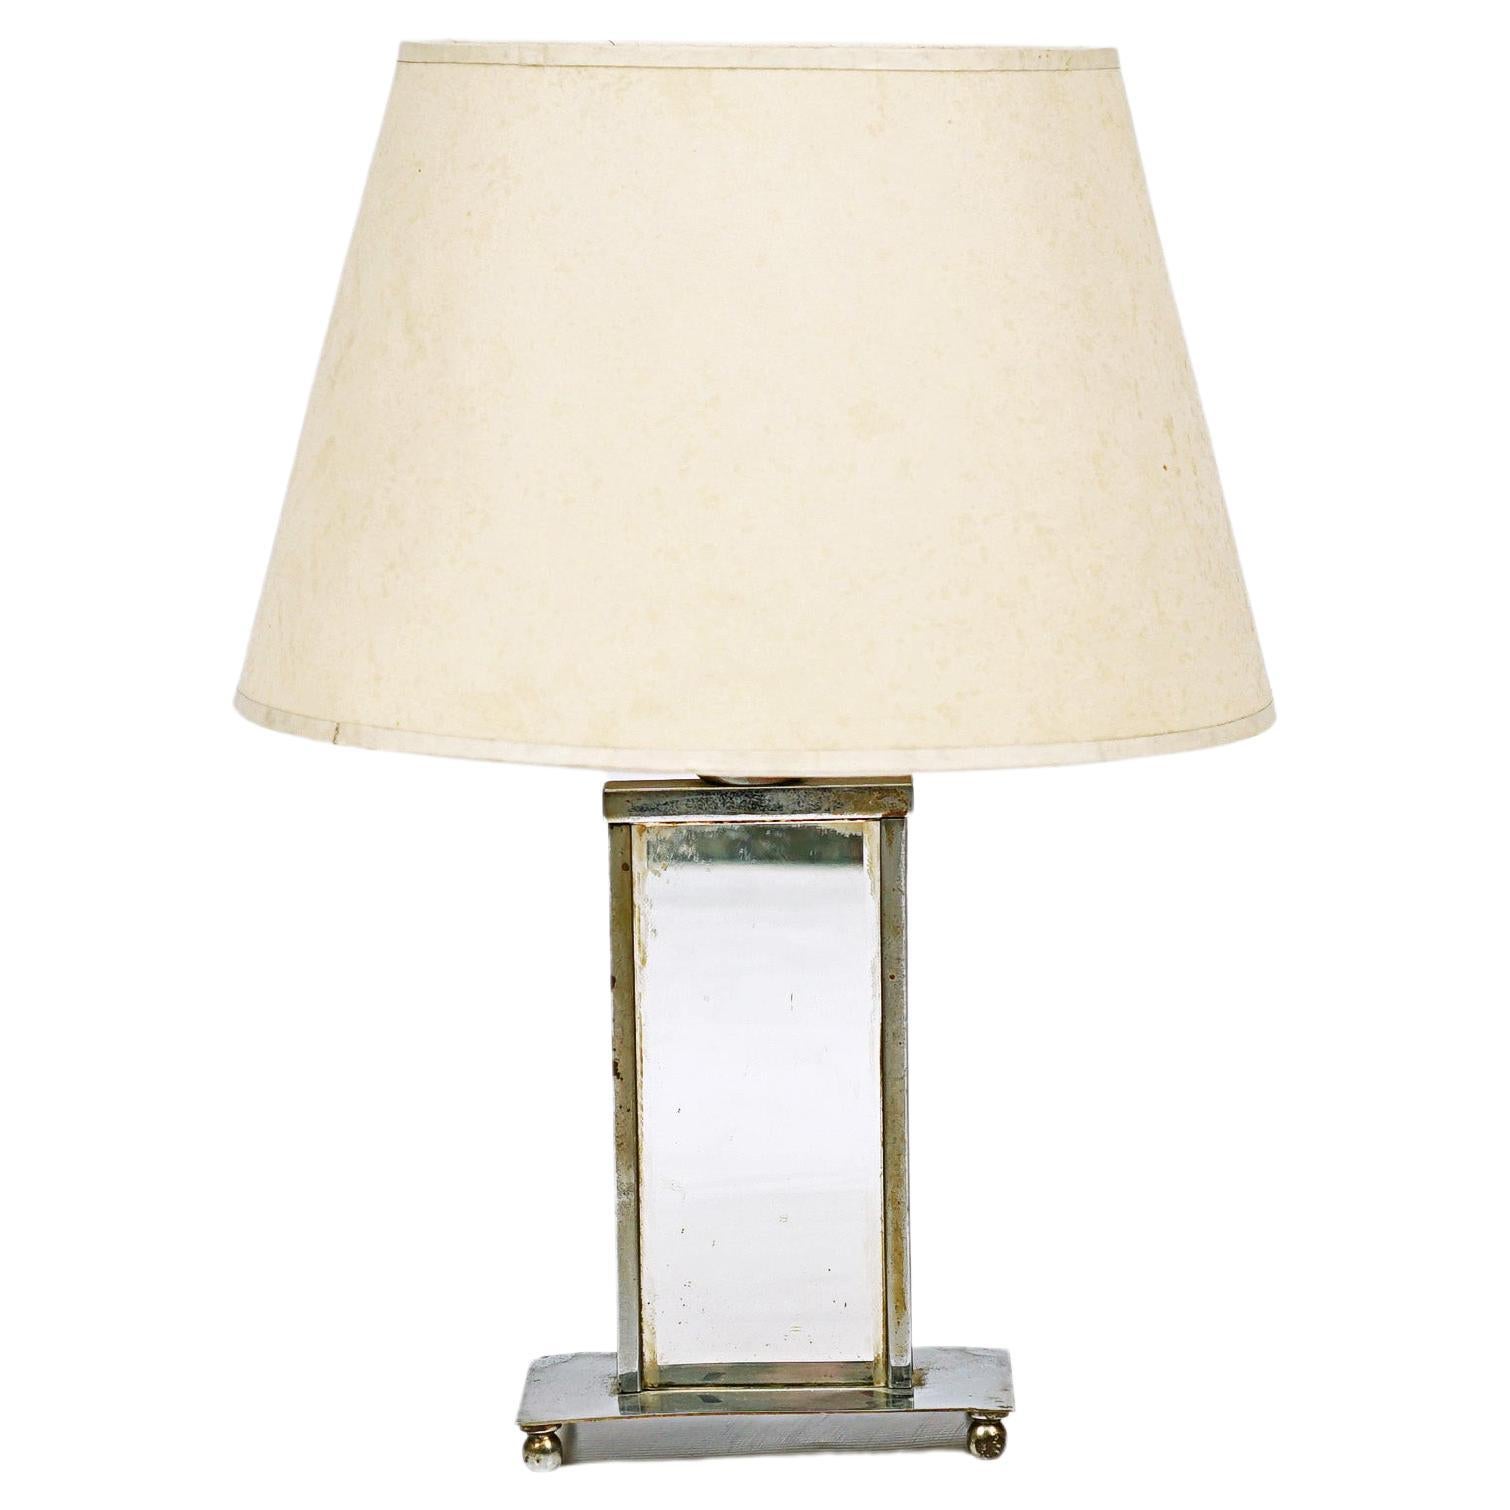 Rectangular table lamp by Jacques Adnet